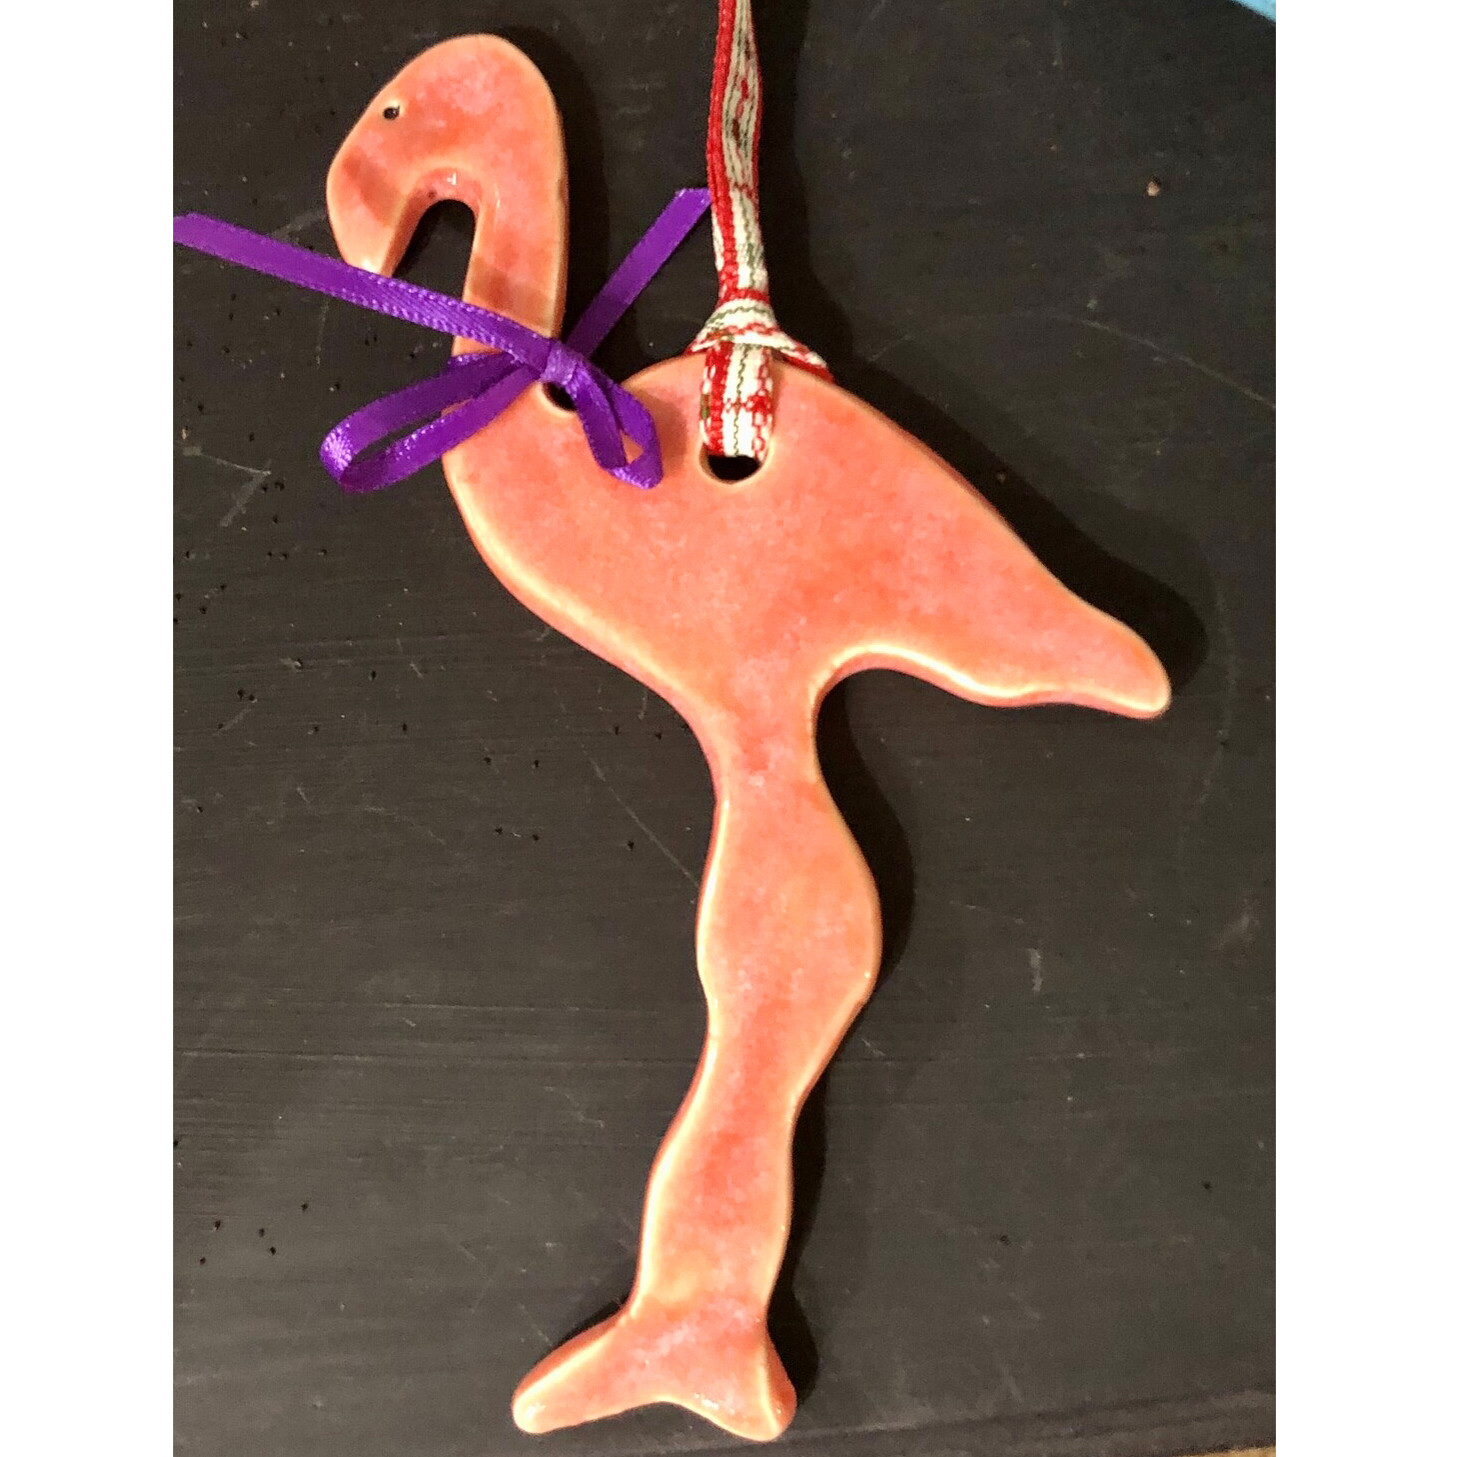 Great little flamingo tree ornament created by Kathy Mantel.